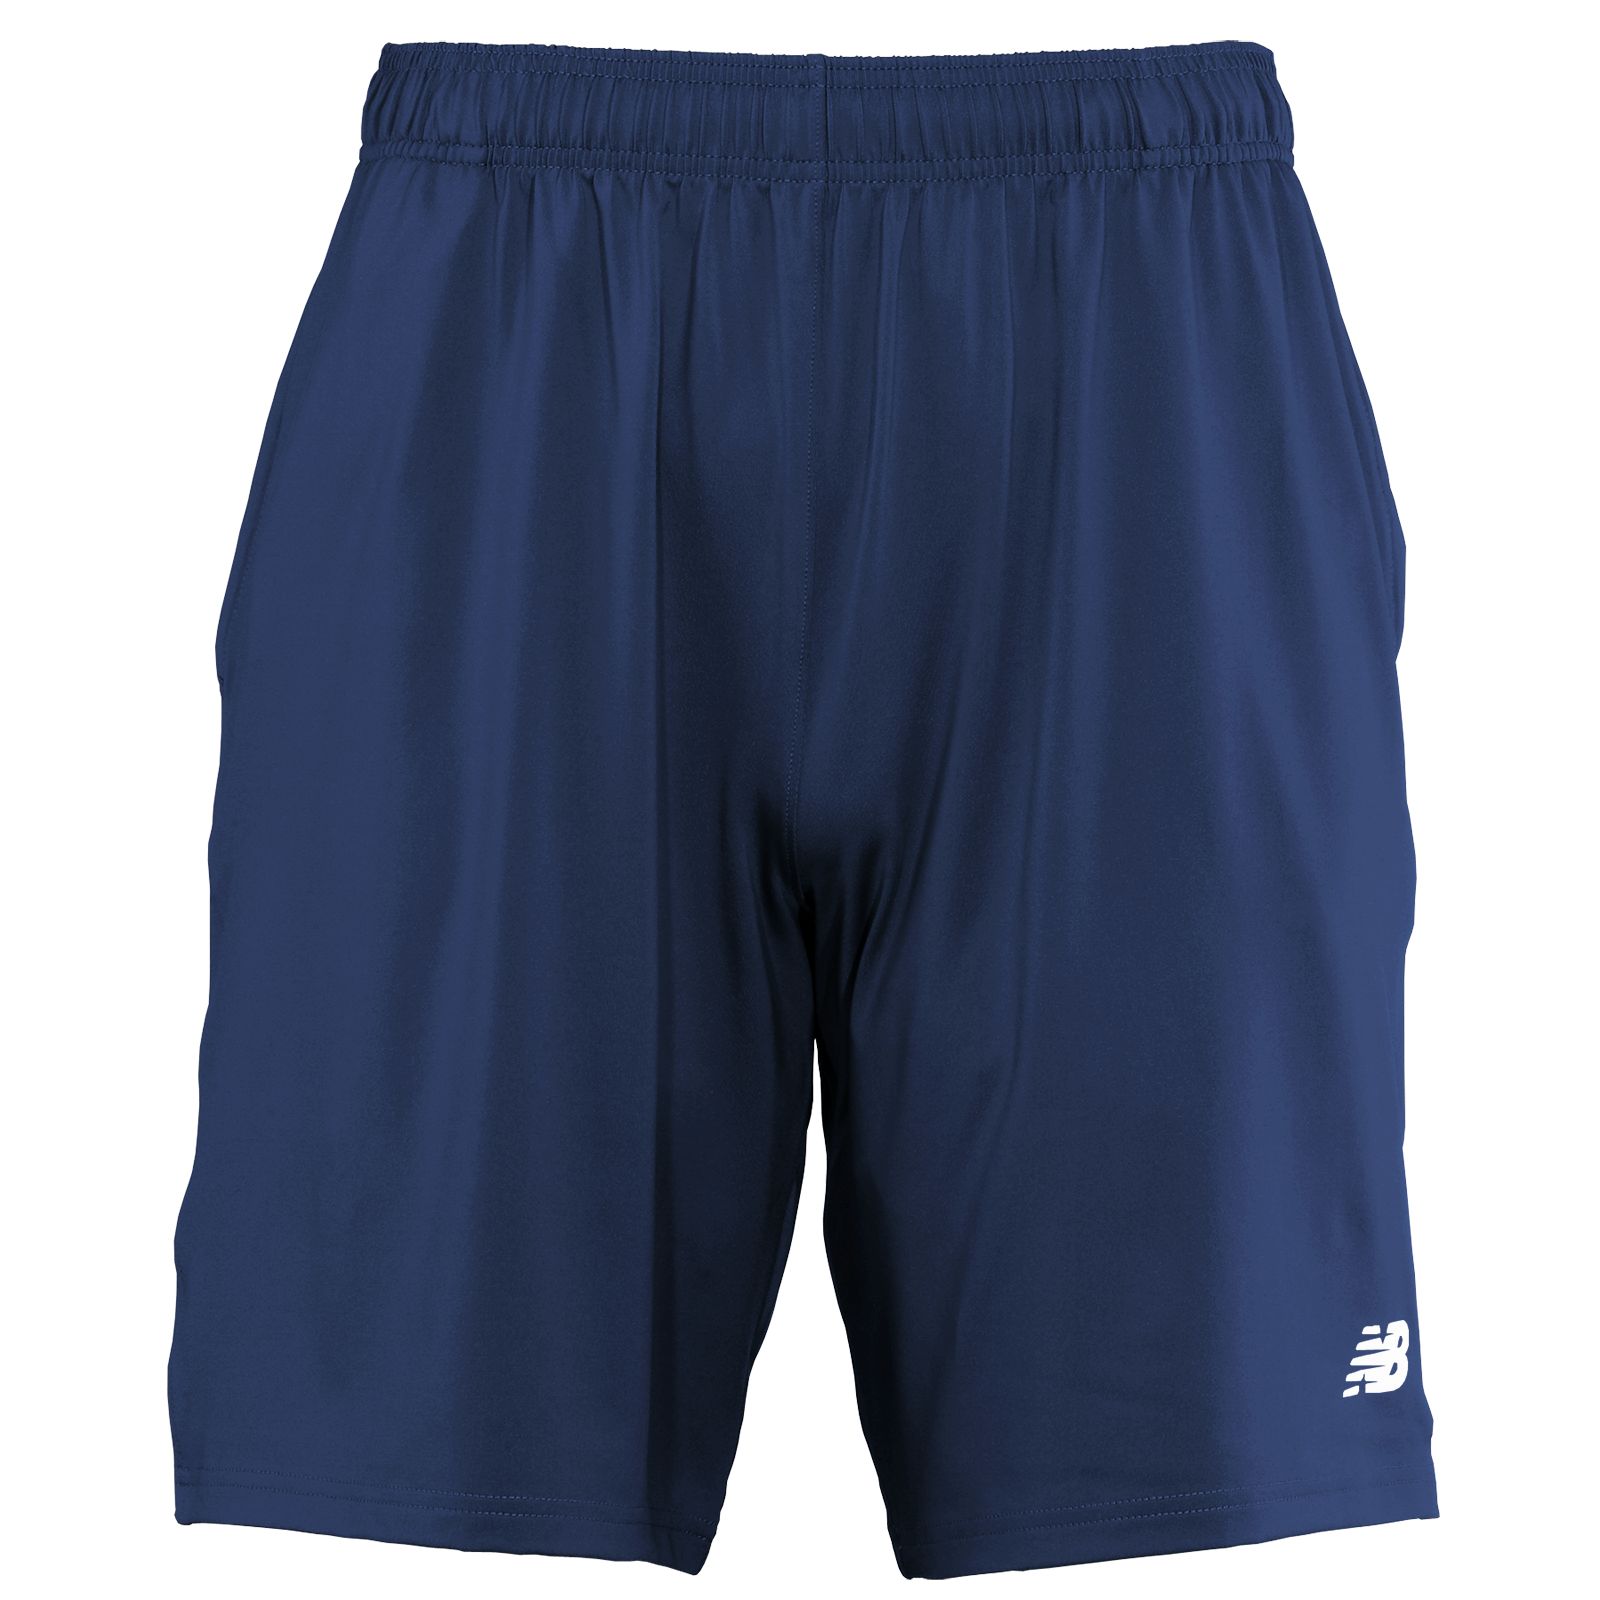 Youth Custom Tech Shorts, Team Navy image number 0